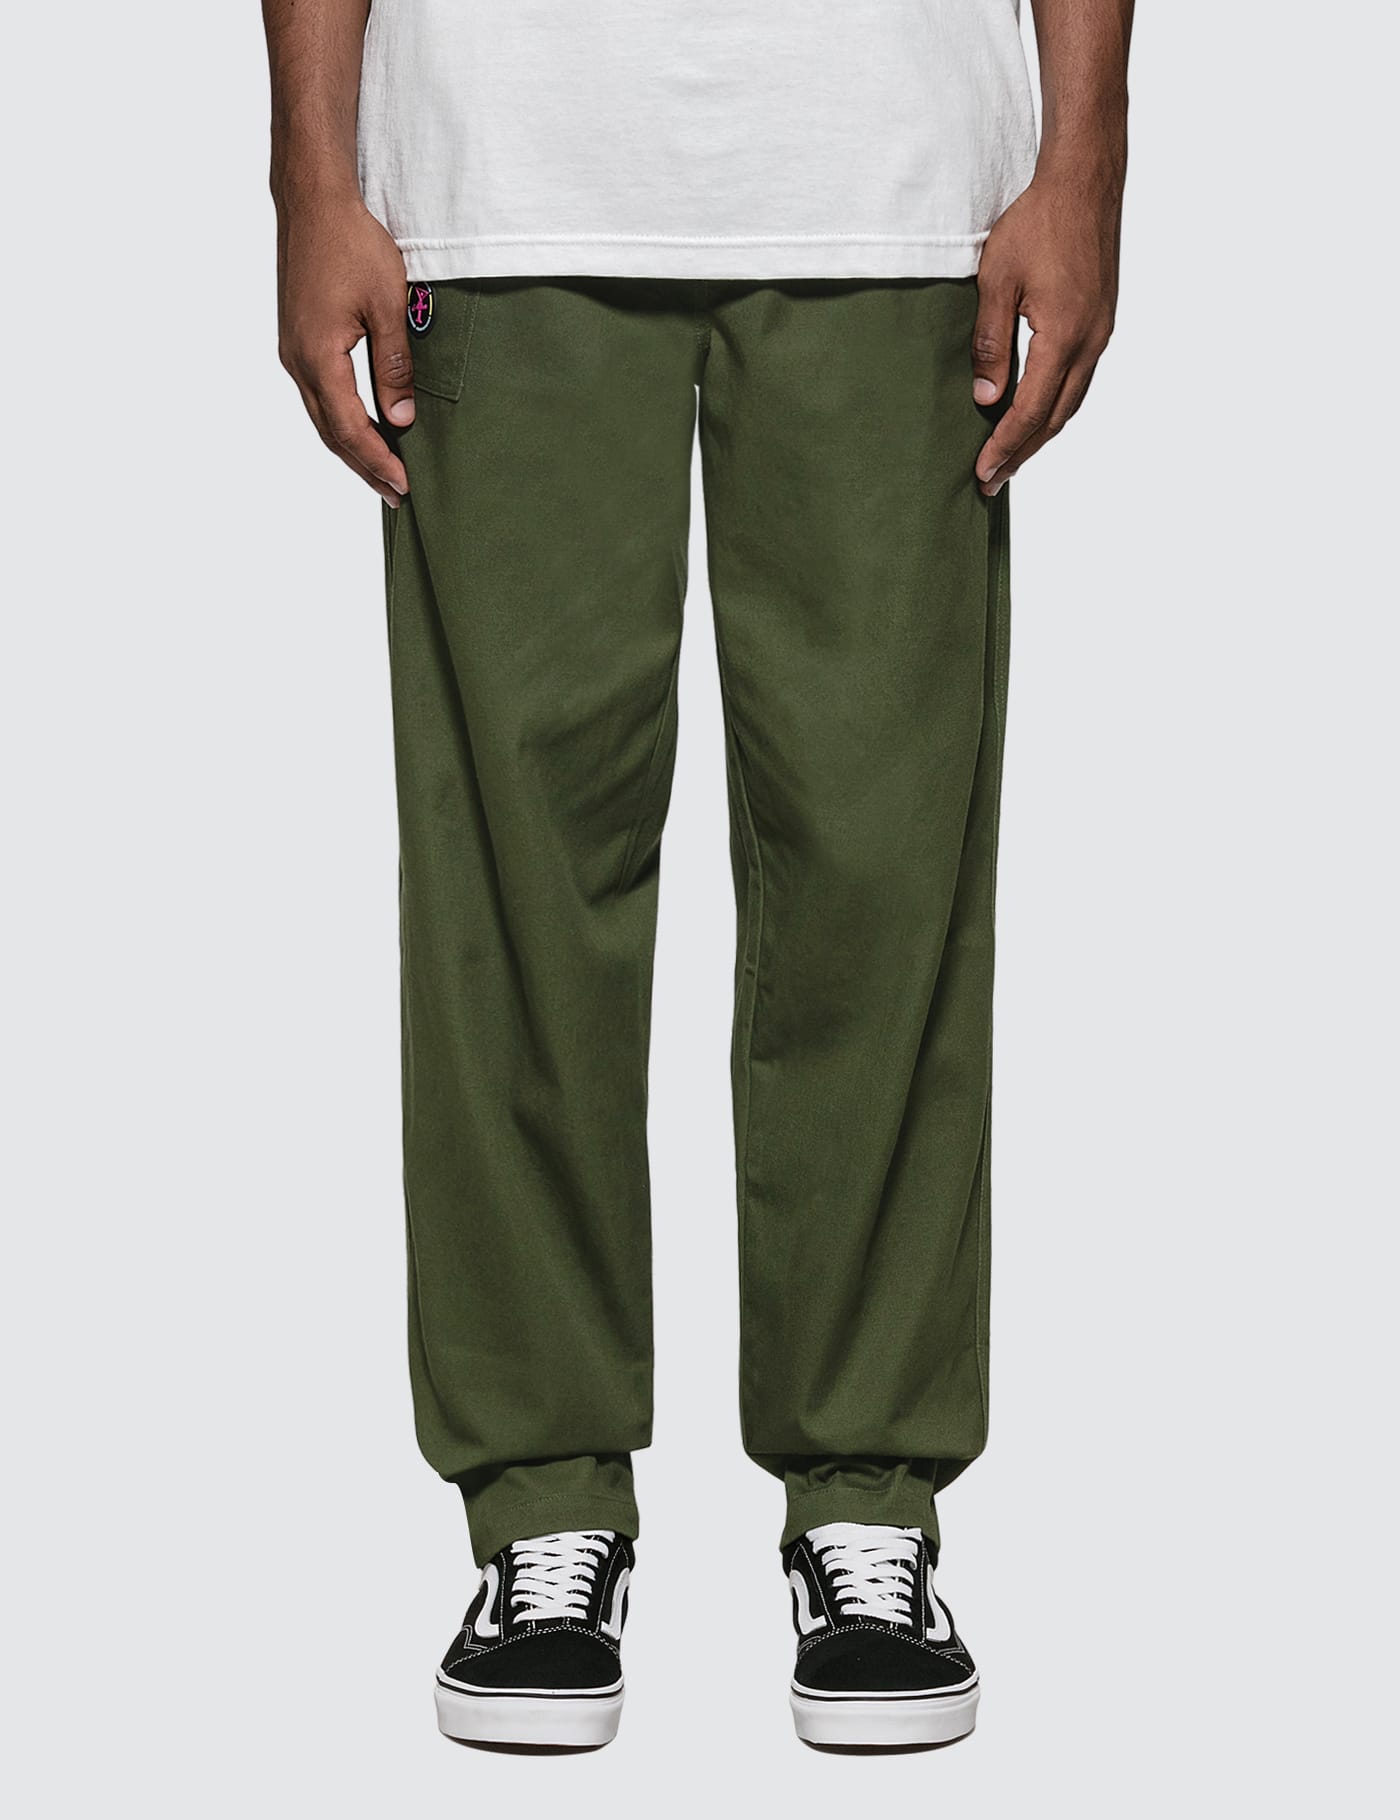 Alltimers - Yacht Rental Pants | HBX - Globally Curated Fashion and  Lifestyle by Hypebeast